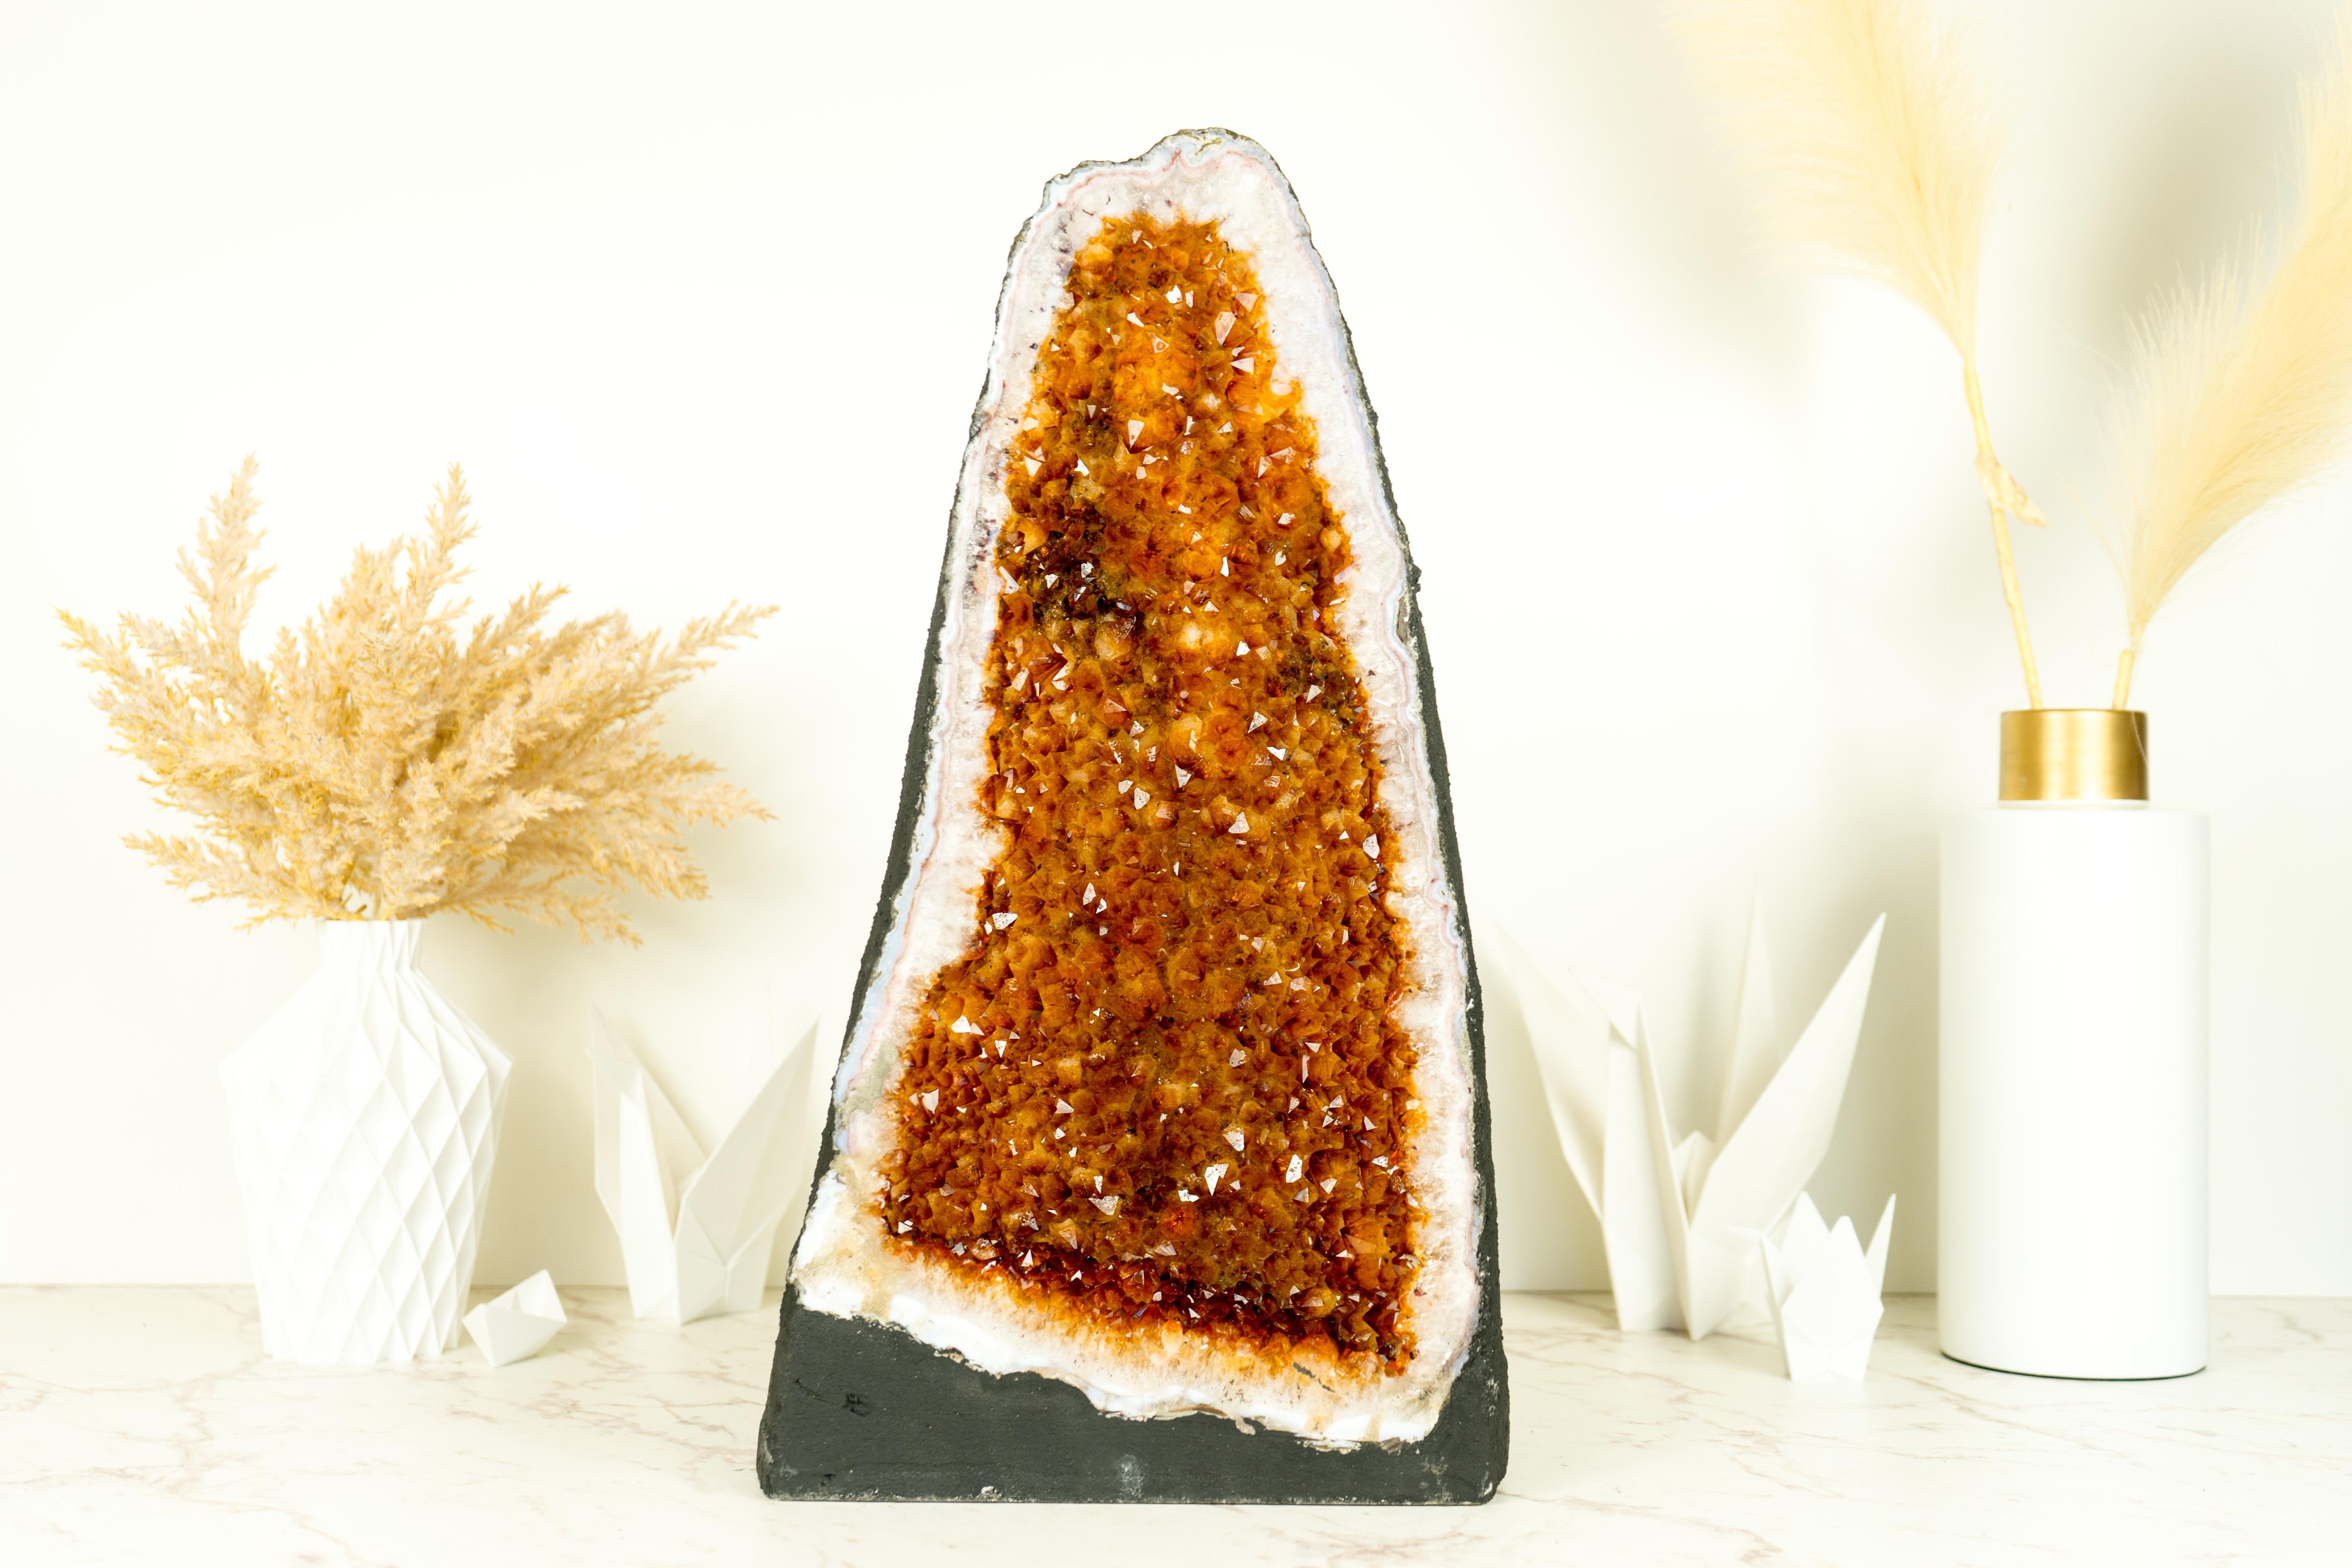 With its perfectly formed Geode Cathedral format and shimmering AAA-grade orange citrine druzy, this Citrine Geode will undoubtedly elevate the aesthetic of any environment, whether as a centerpiece in your collection or a captivating focal point in